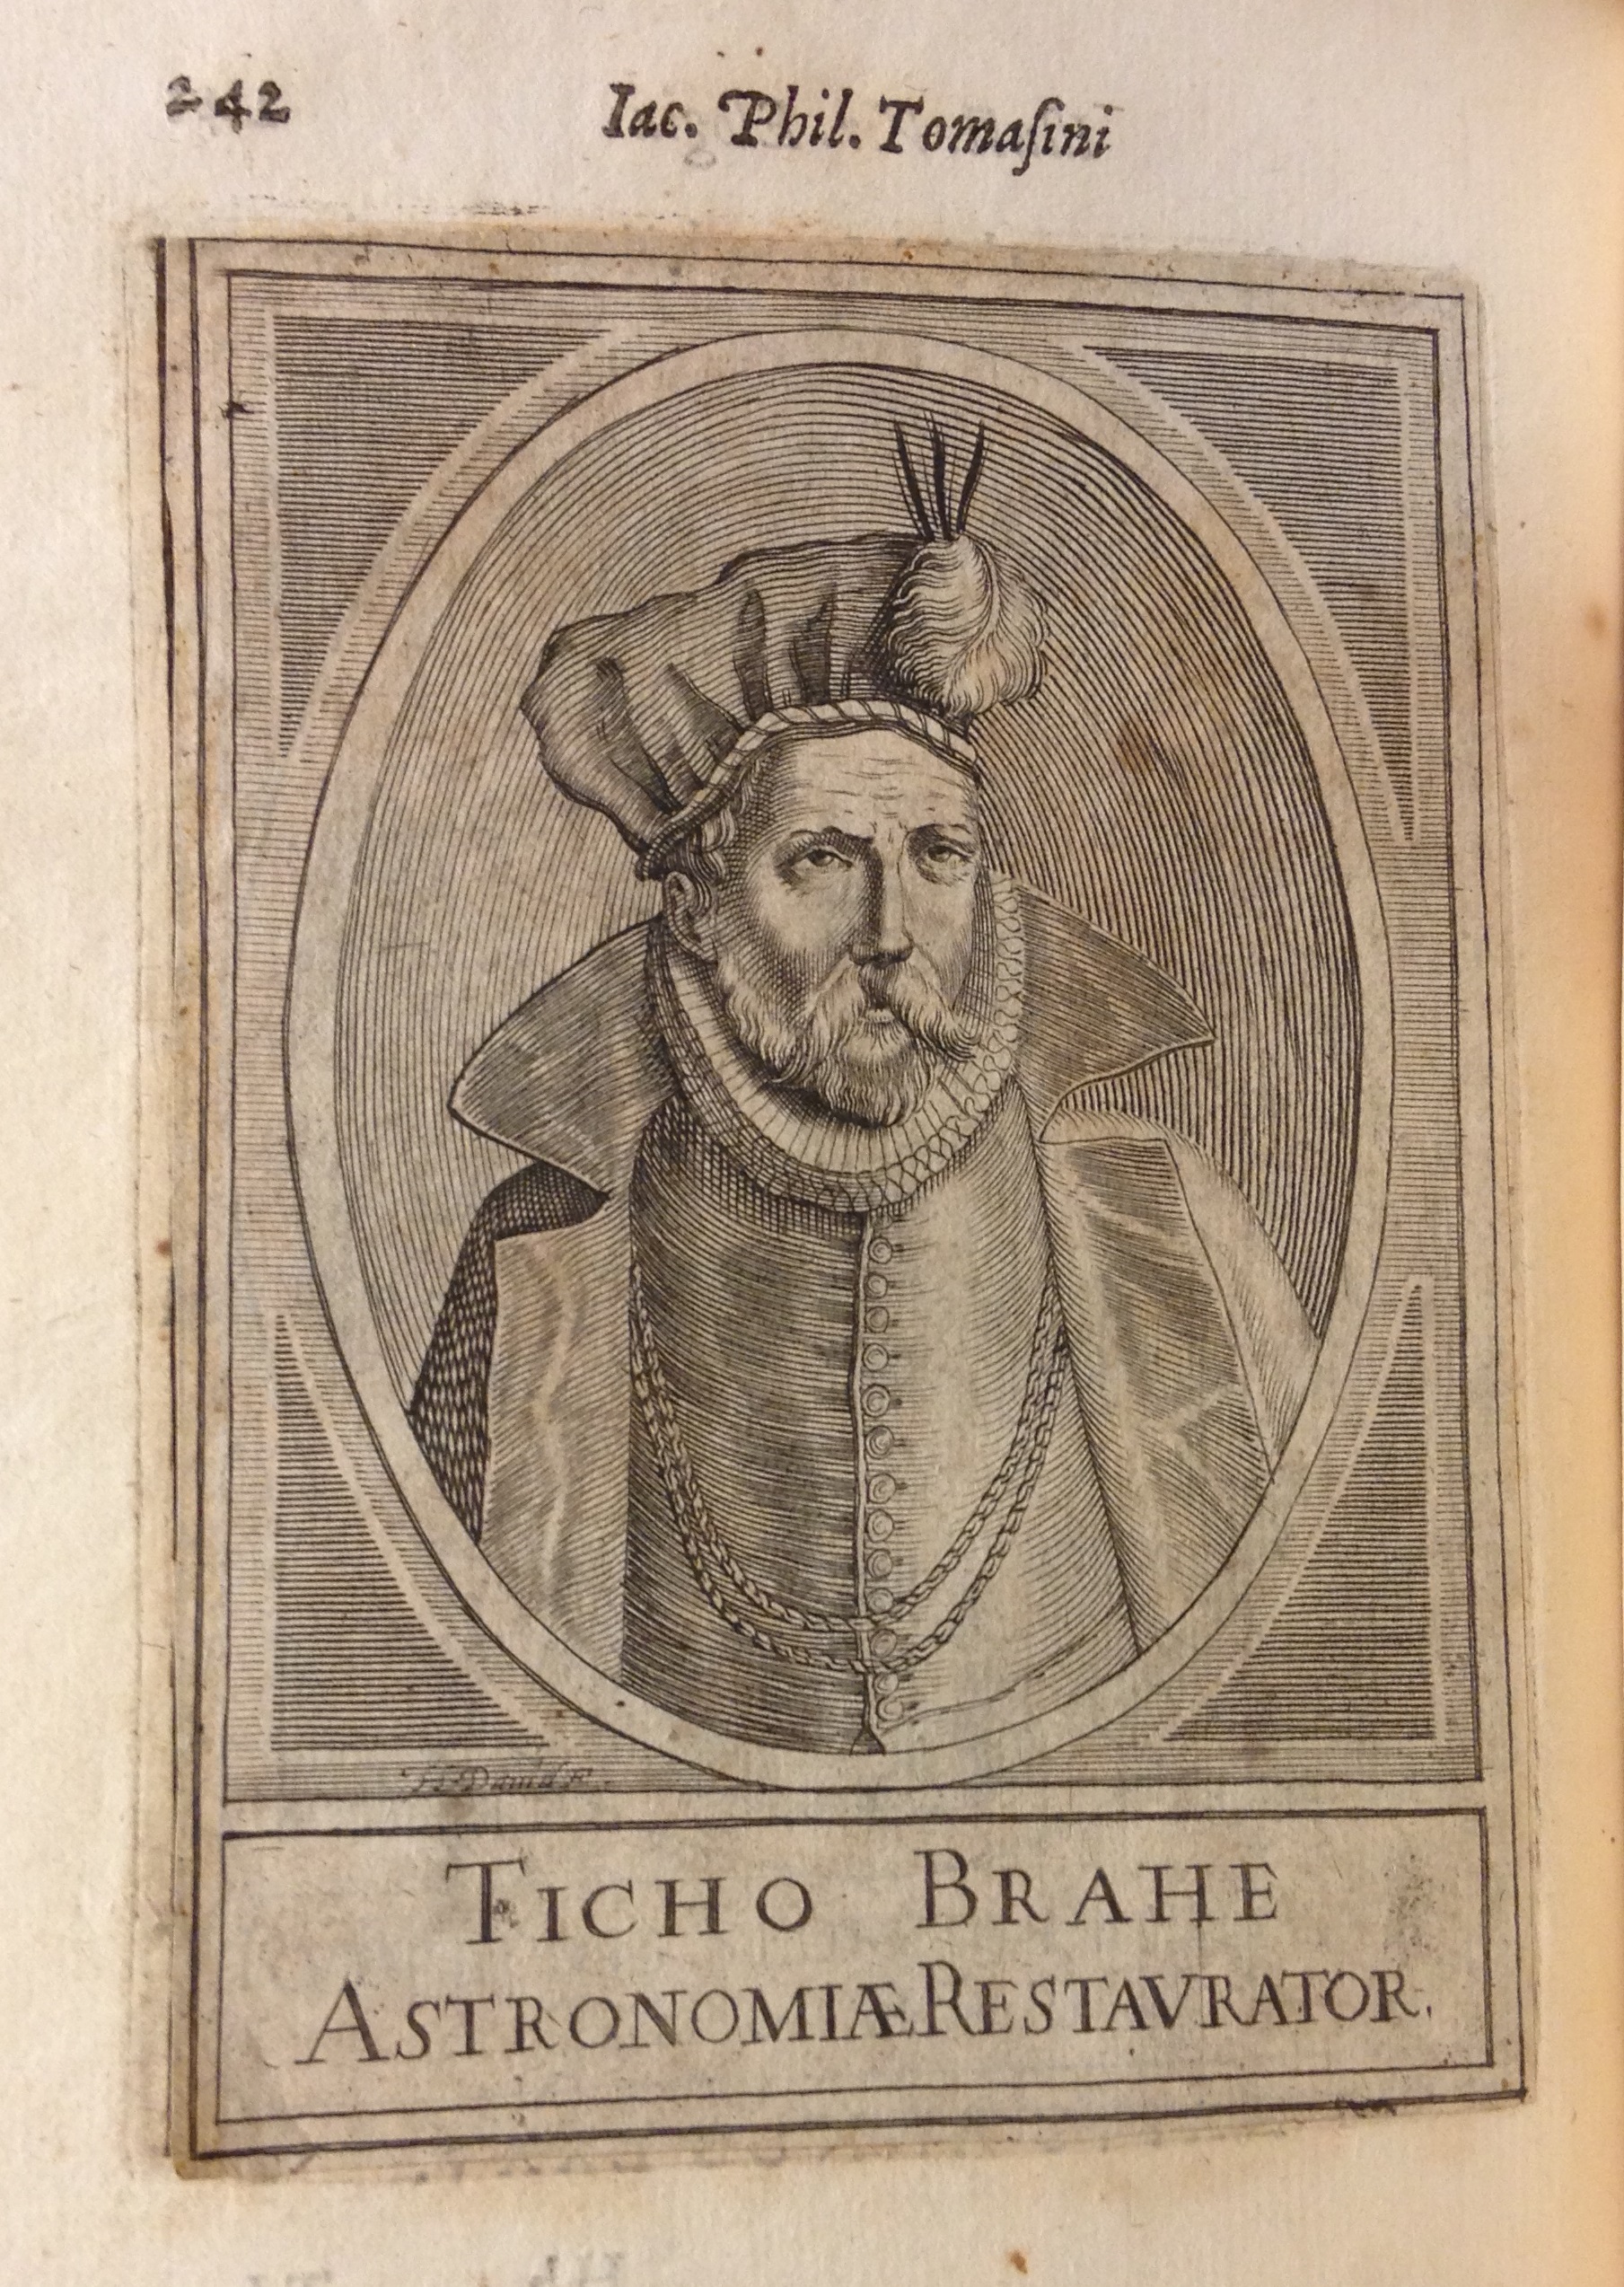 A stellar eclipse! This engraved portrait of astronomer Tycho Brahe is actually a cancel slip pasted over another engraved portrait inadvertently printed on the wrong leaf. Note how the lower left corner is lifting upward, and the engraved border of the underlying portrait visible at left. Giacomo Filippo Tomasini, Illustrium virorum elogia iconibus illustrata (Padua, 1630), p. 242.   (CT1122 .T6 1630)